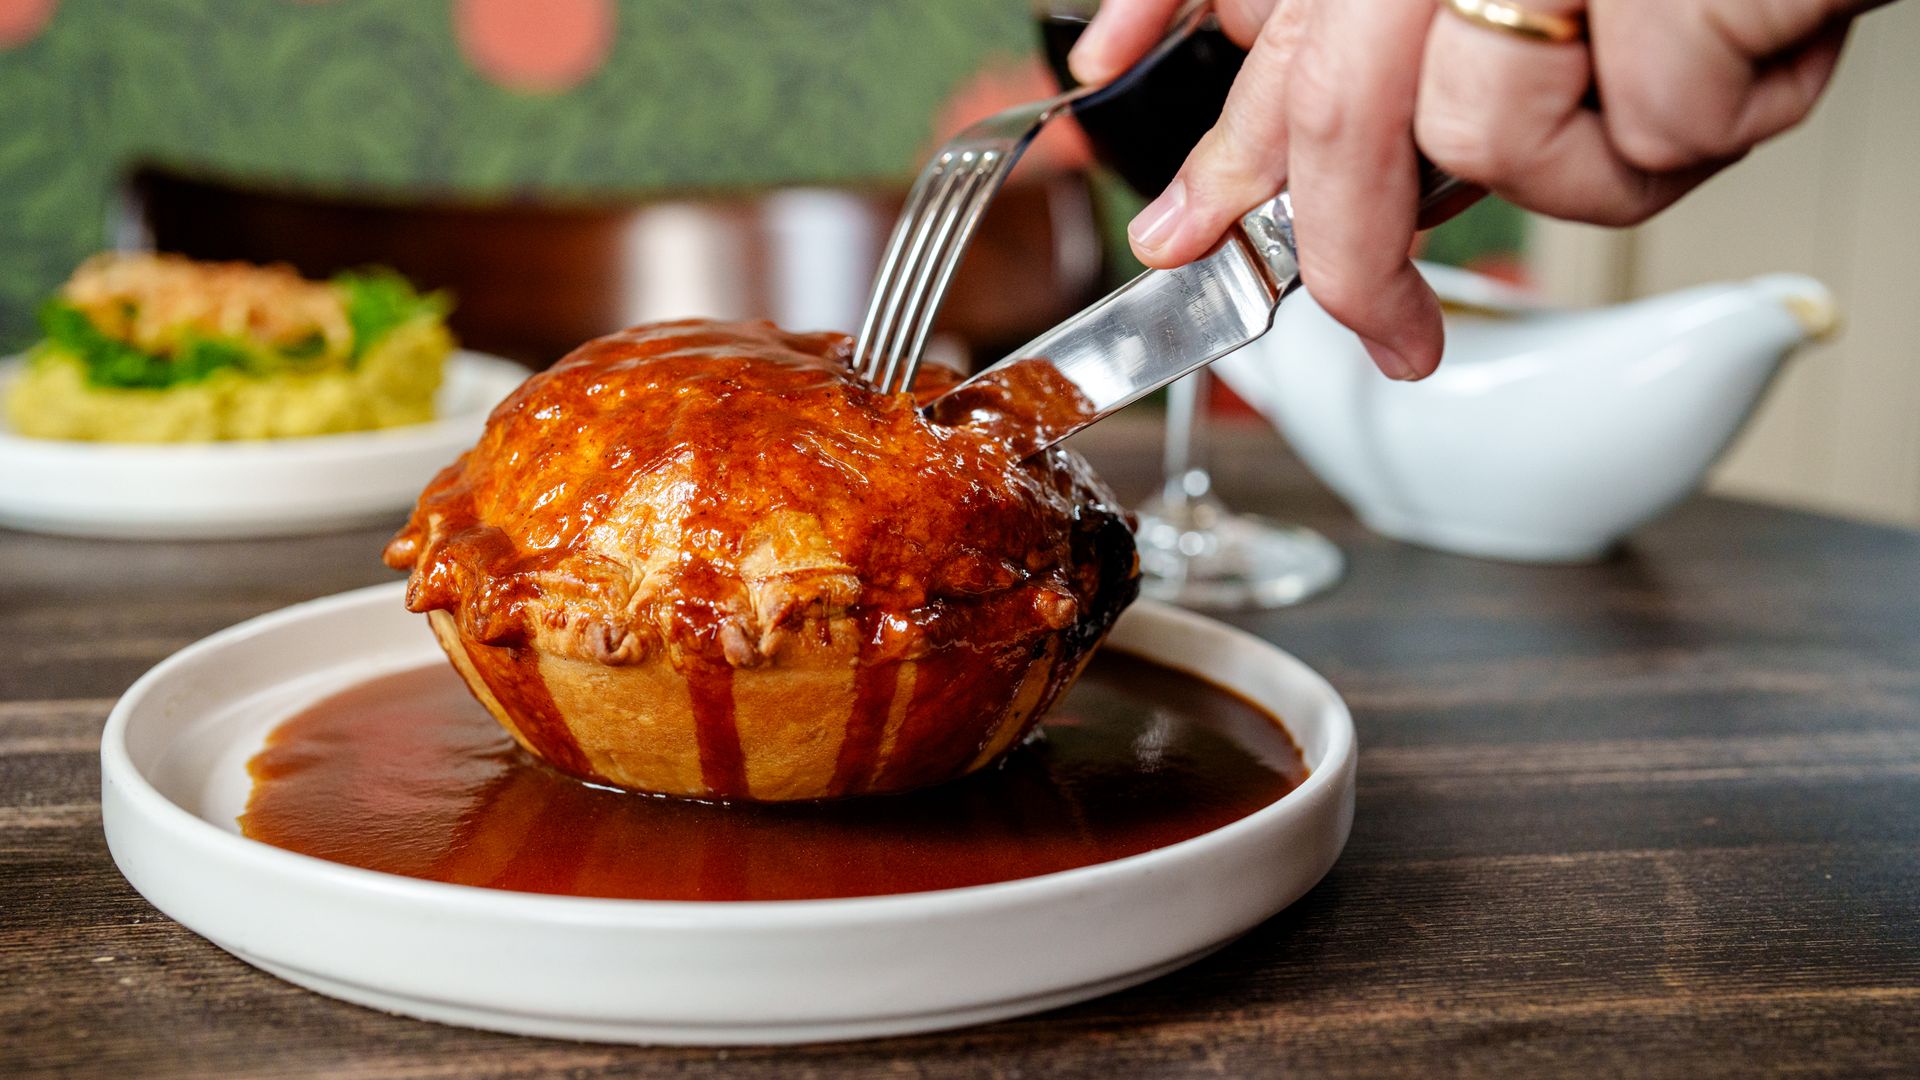 Someone uses a knife and fork to cut into a braised short rib pie, which has been cooked to golden brown, and is covered with a dark red sauce.